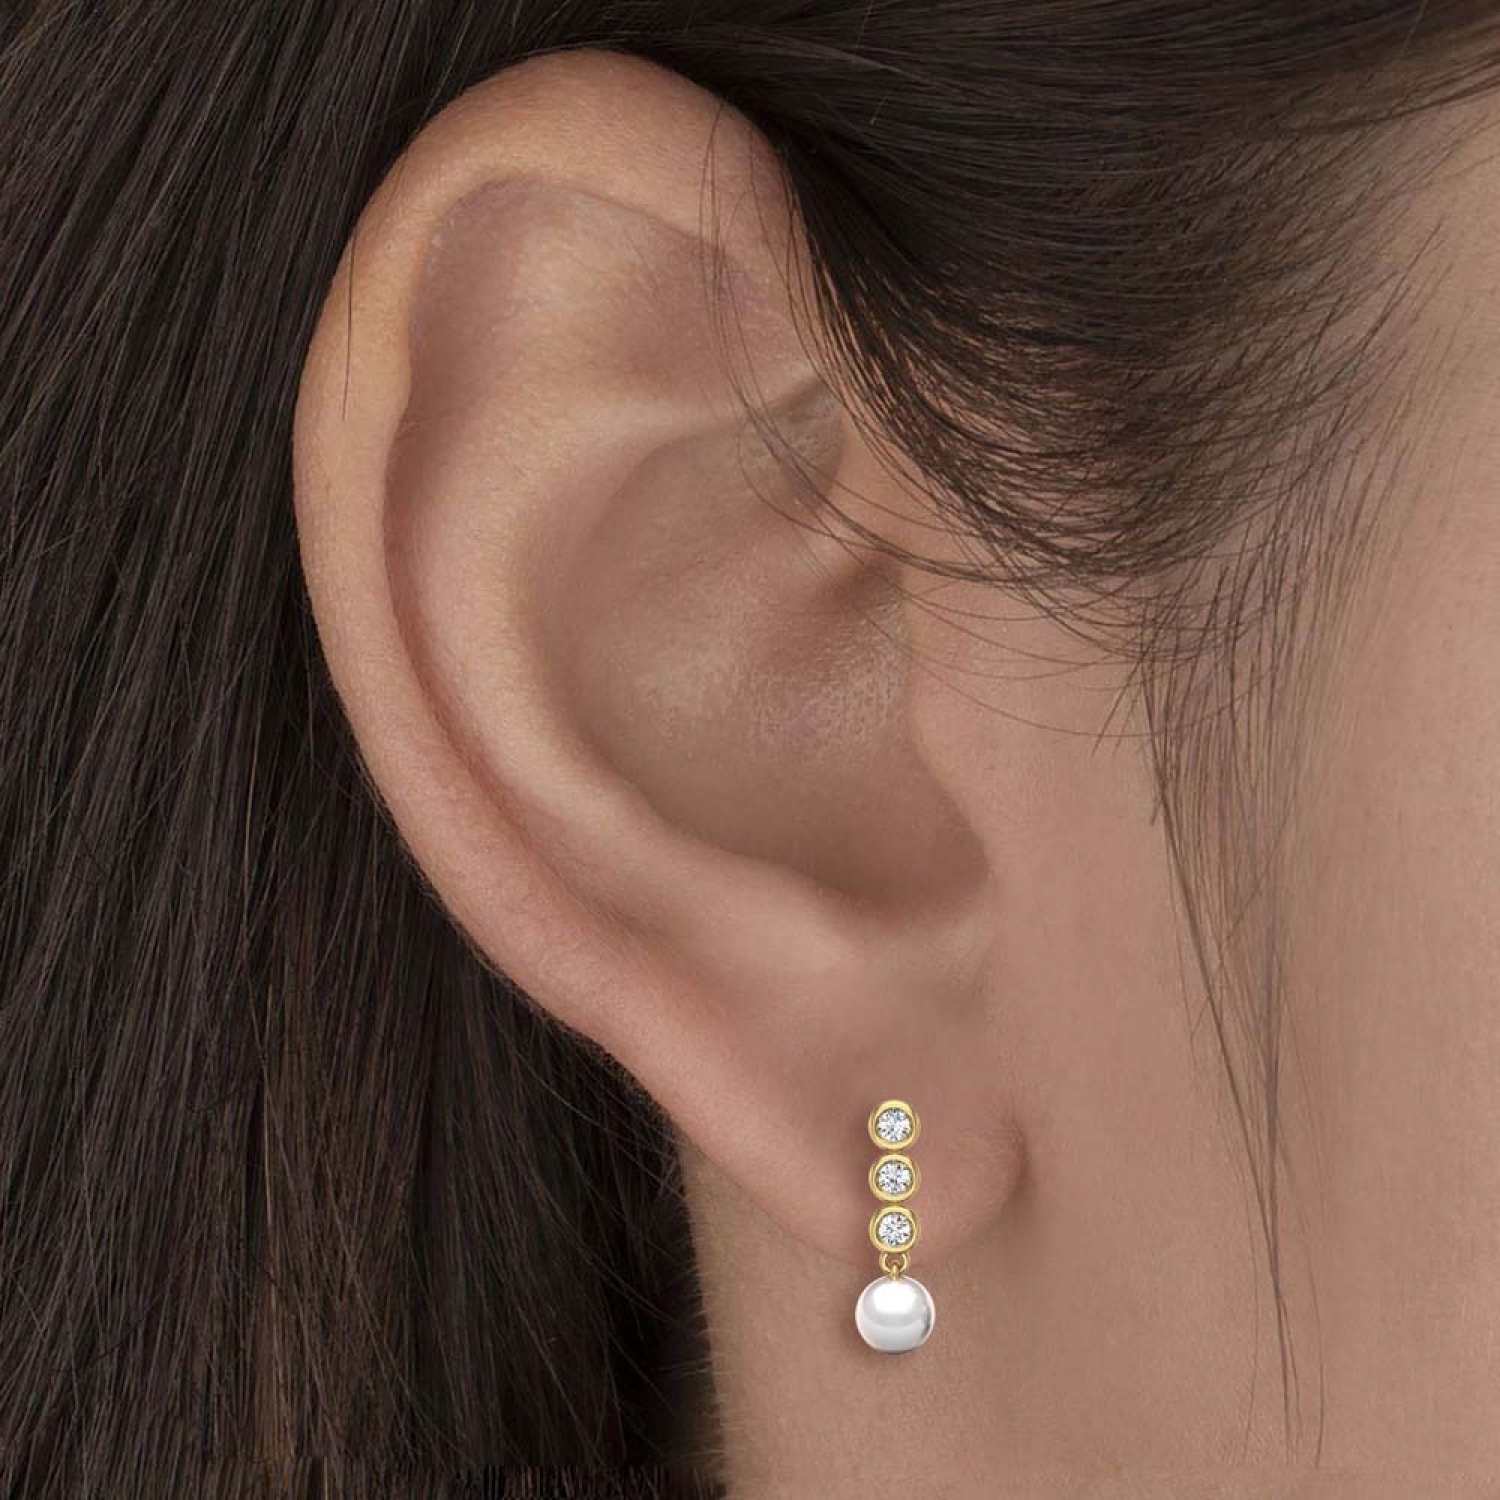 Two Diamond Drop Earrings in White, Yellow or Rose Gold